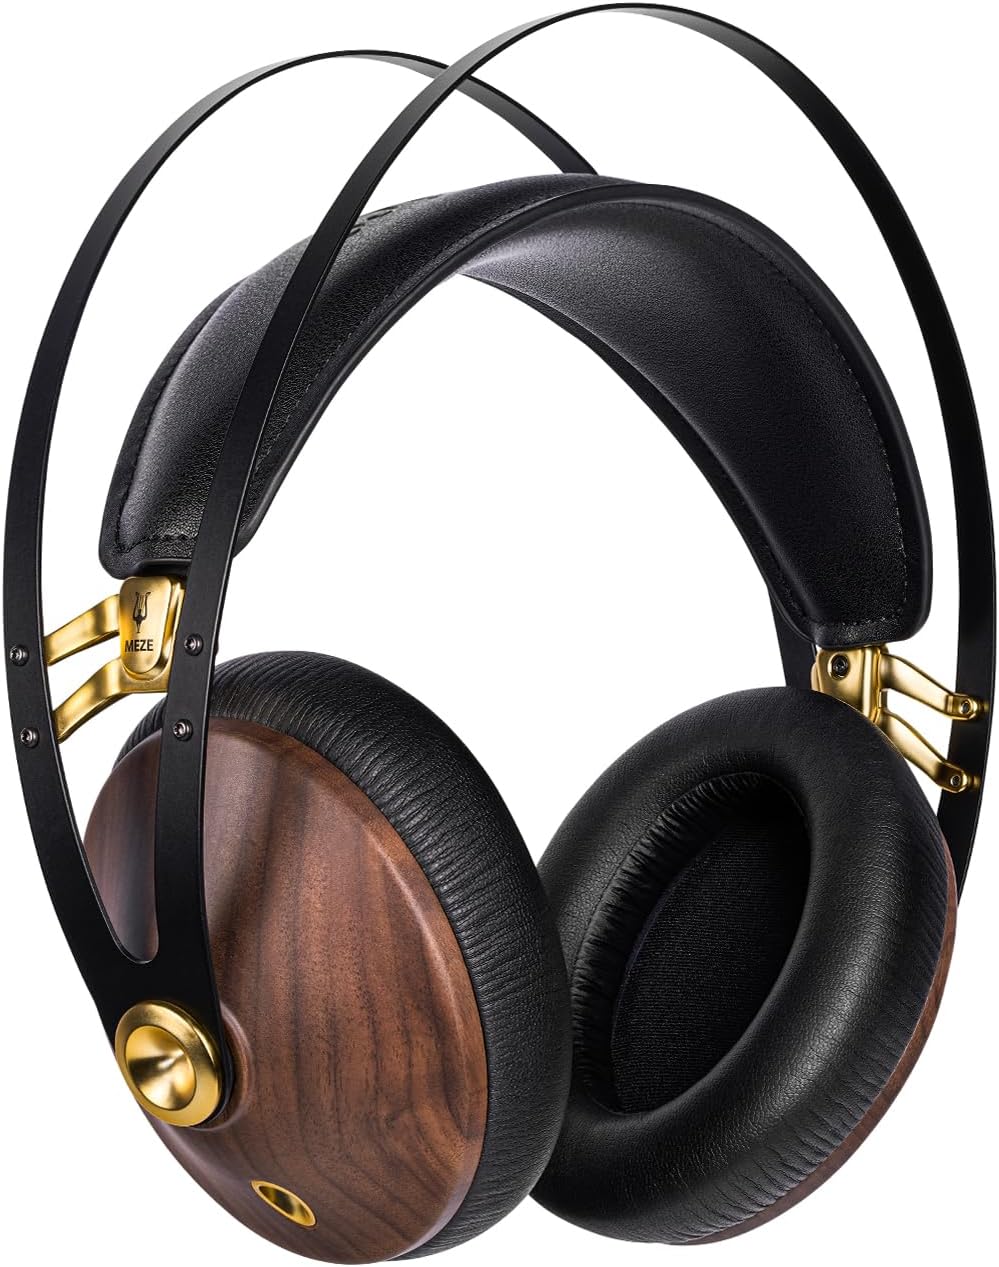 A pair of headphones with gold and wood accents.